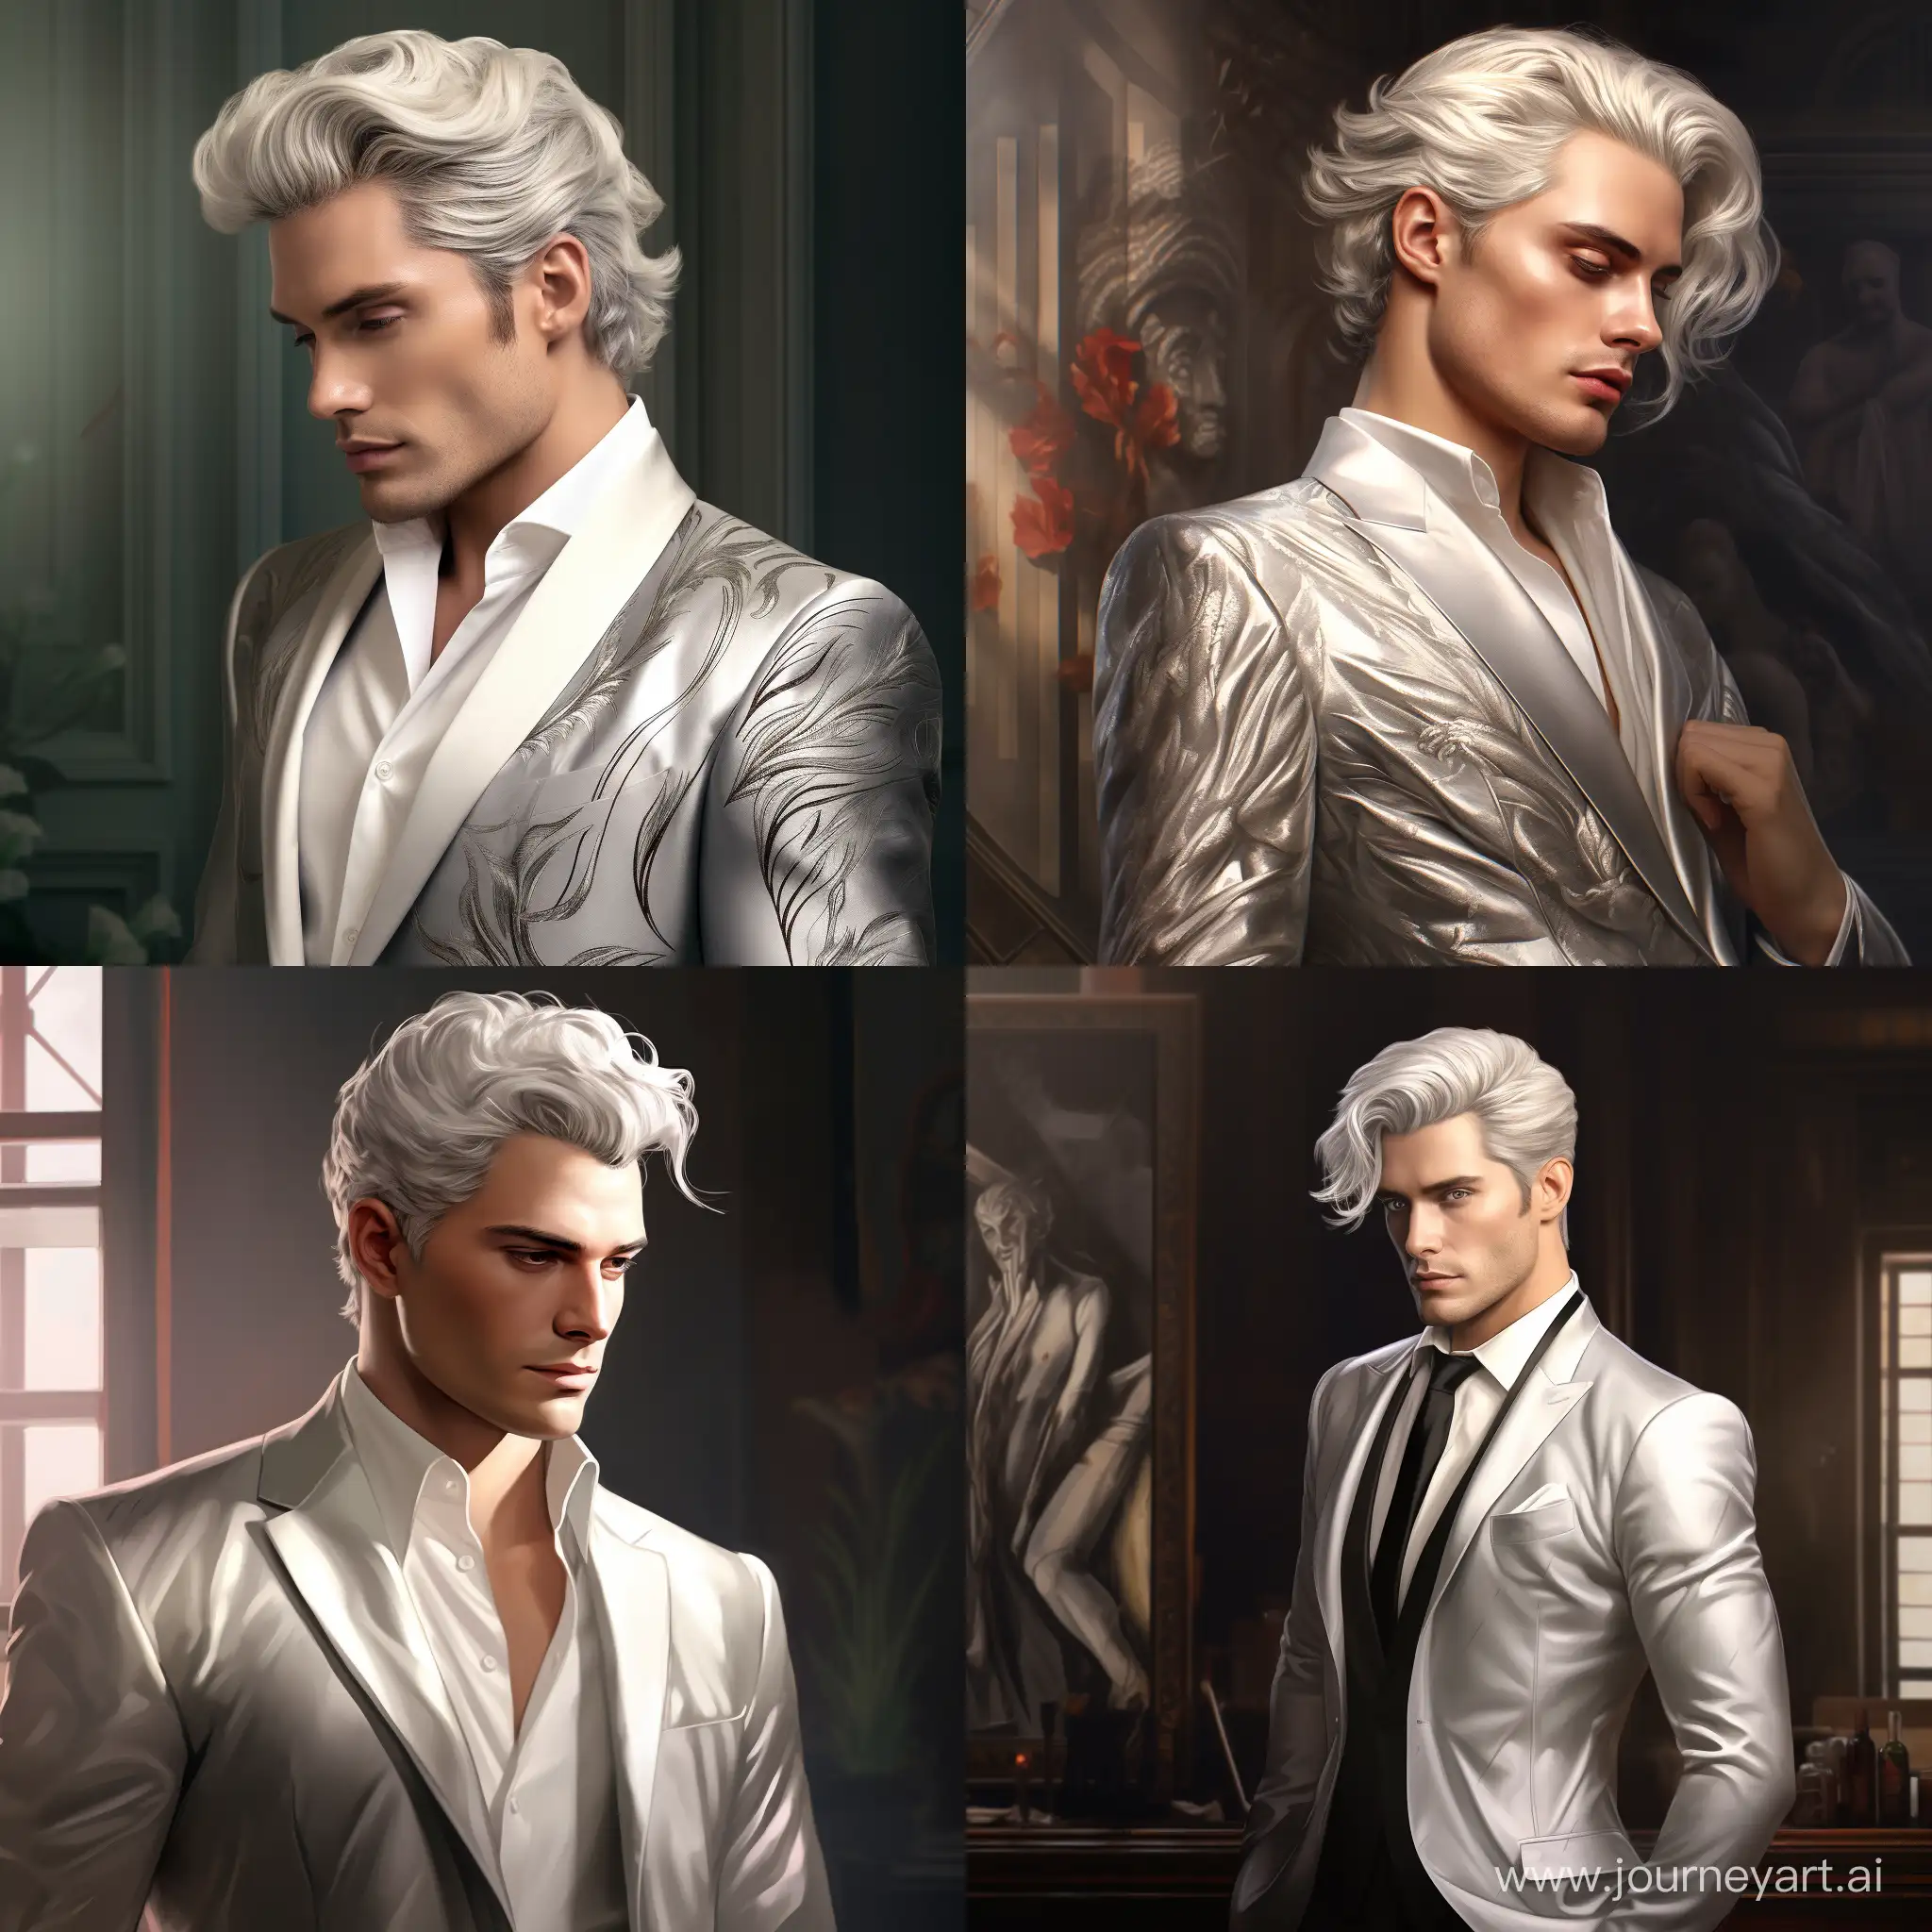 A fashionable digital portrait of a mysterious and alluring young man with bright silver hair cascading down to the middle of his back. He stands at full height, dressed in an elegant light gray suit, the epitome of the latest fashions of his home world. His face, with harmonious features that embody both toughness and attractiveness, is open and determined, grabbing the viewer's attention. His mesmerizing eyes, the color of which is so captivating that it can eclipse the human mind, stare into the distance, reflecting an unfathomable depth of emotion and experience. Shot with a Sony G Master 85mm, ISO 200, fashion lens, He stands confidently in a stylized setting inspired by his home world, with vibrant colors and futuristic architecture. His light gray suit, impeccably tailored, accentuates his stateliness and elegance. The winged snake tattoo on his right arm wriggles and twists, adding an air of mystery and intrigue. Silver hair flows down his back, catching the light and giving him an ethereal beauty. A prominent Rolex watch on his left hand symbolizes his success and mysterious origins. Created in a hyper-realistic style, with meticulous attention to detail and texture